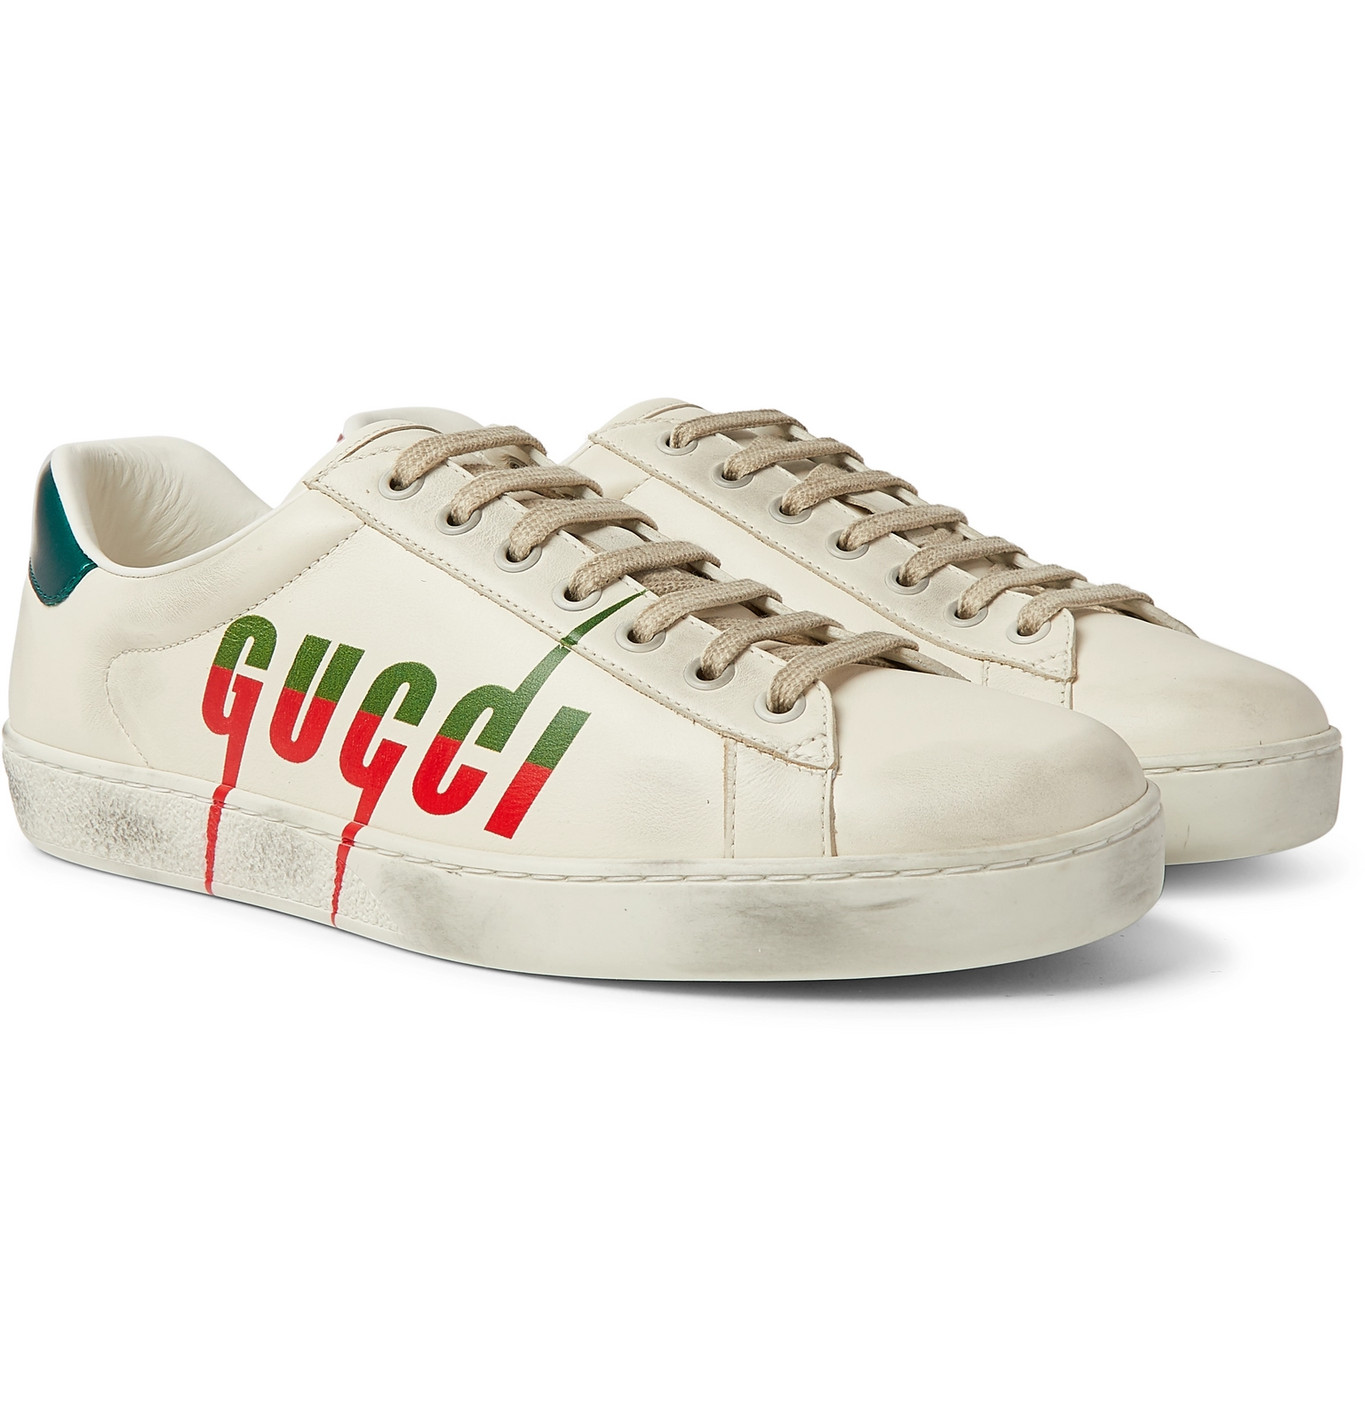 Gucci - Ace Distressed Leather Sneakers 